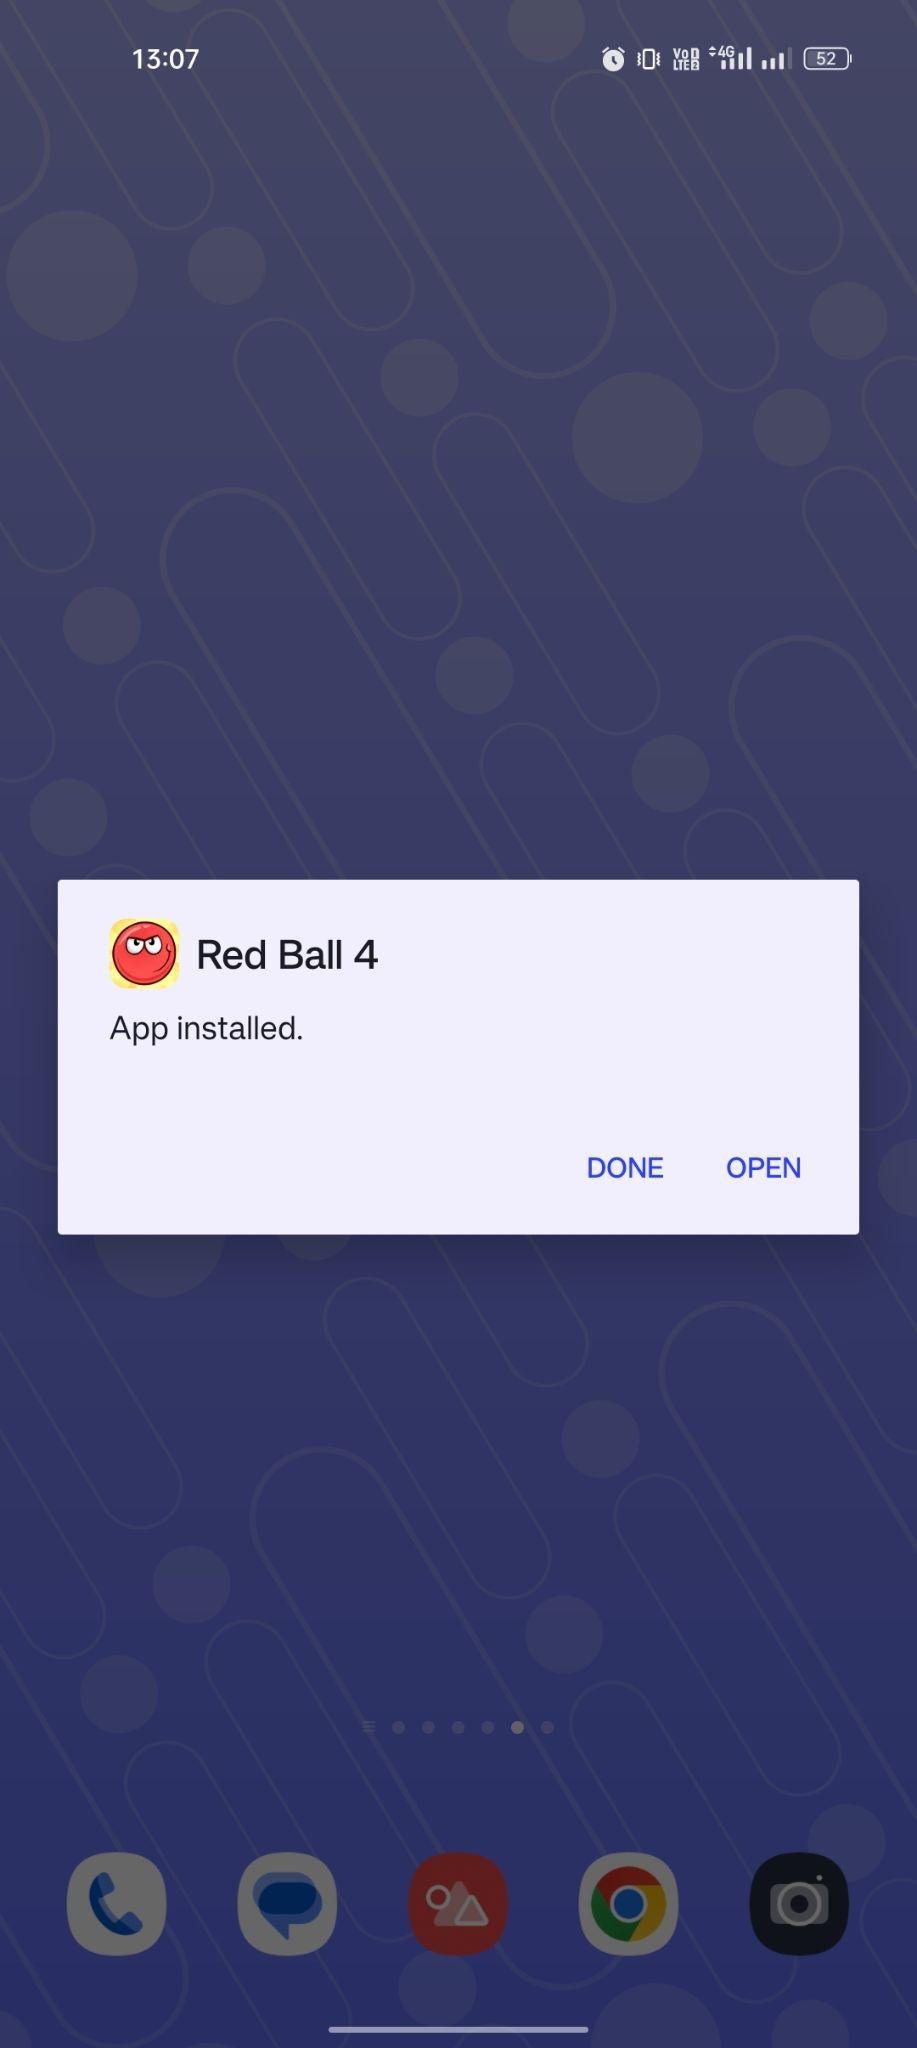 Red Ball 4 apk installed